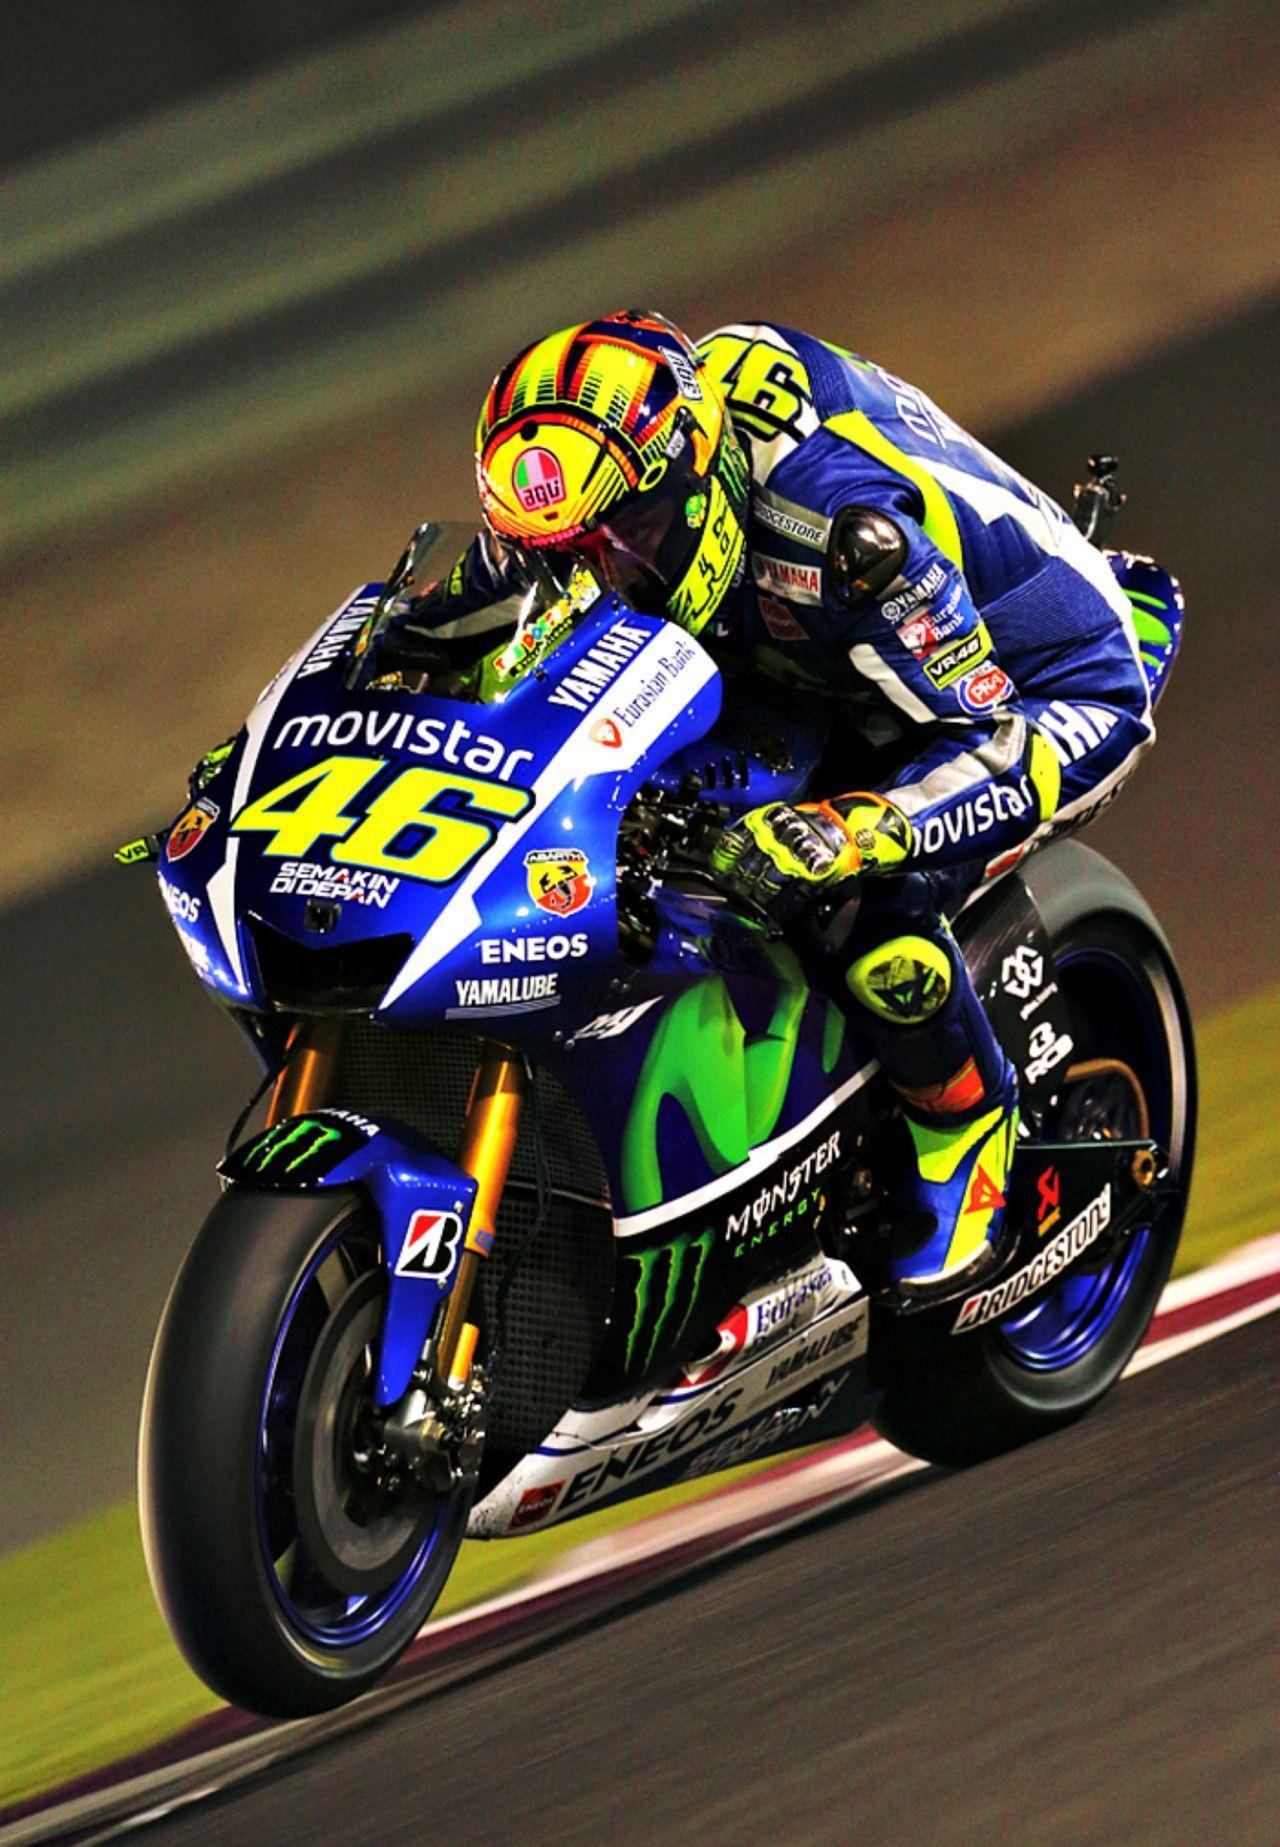 image about Valentino Rossi VR46. Cars, Warm